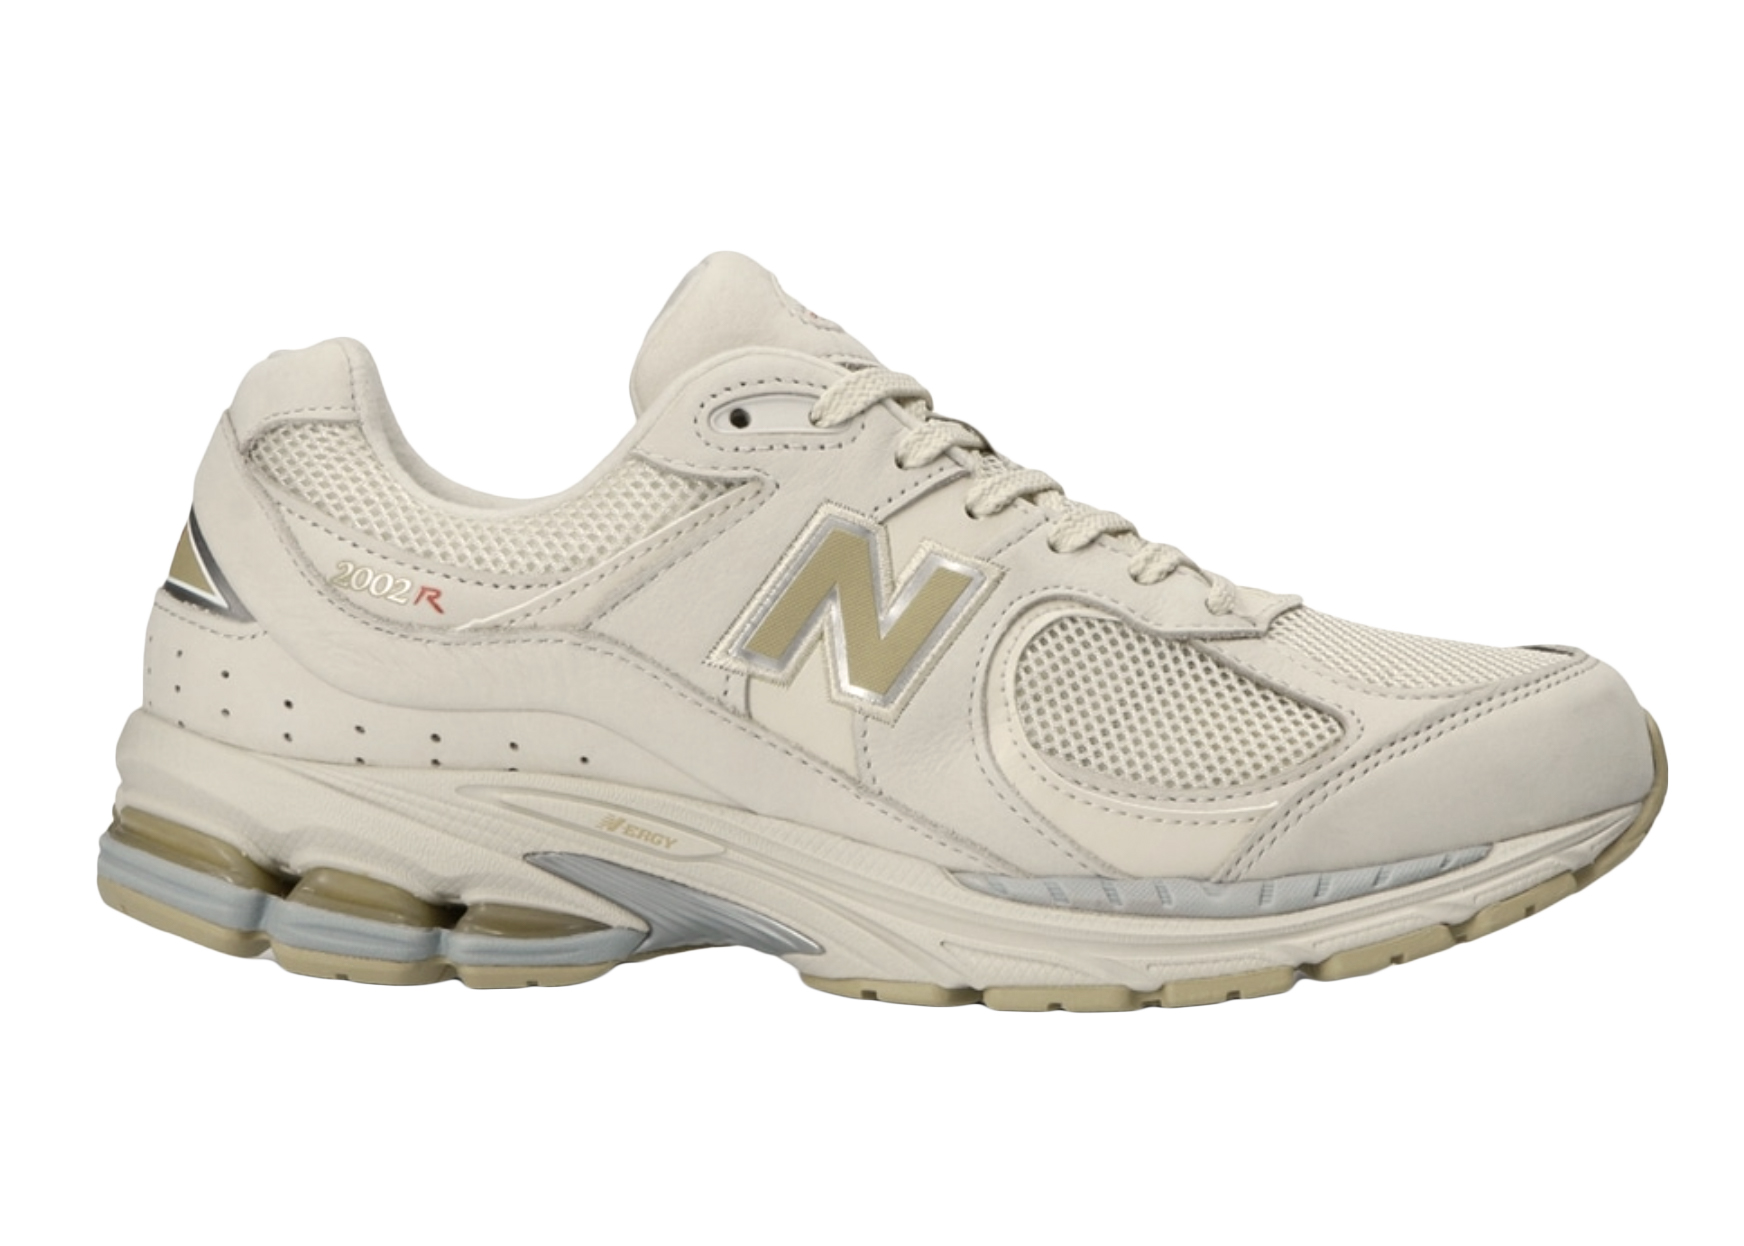 Buy New Balance 2002R Shoes & New Sneakers - StockX